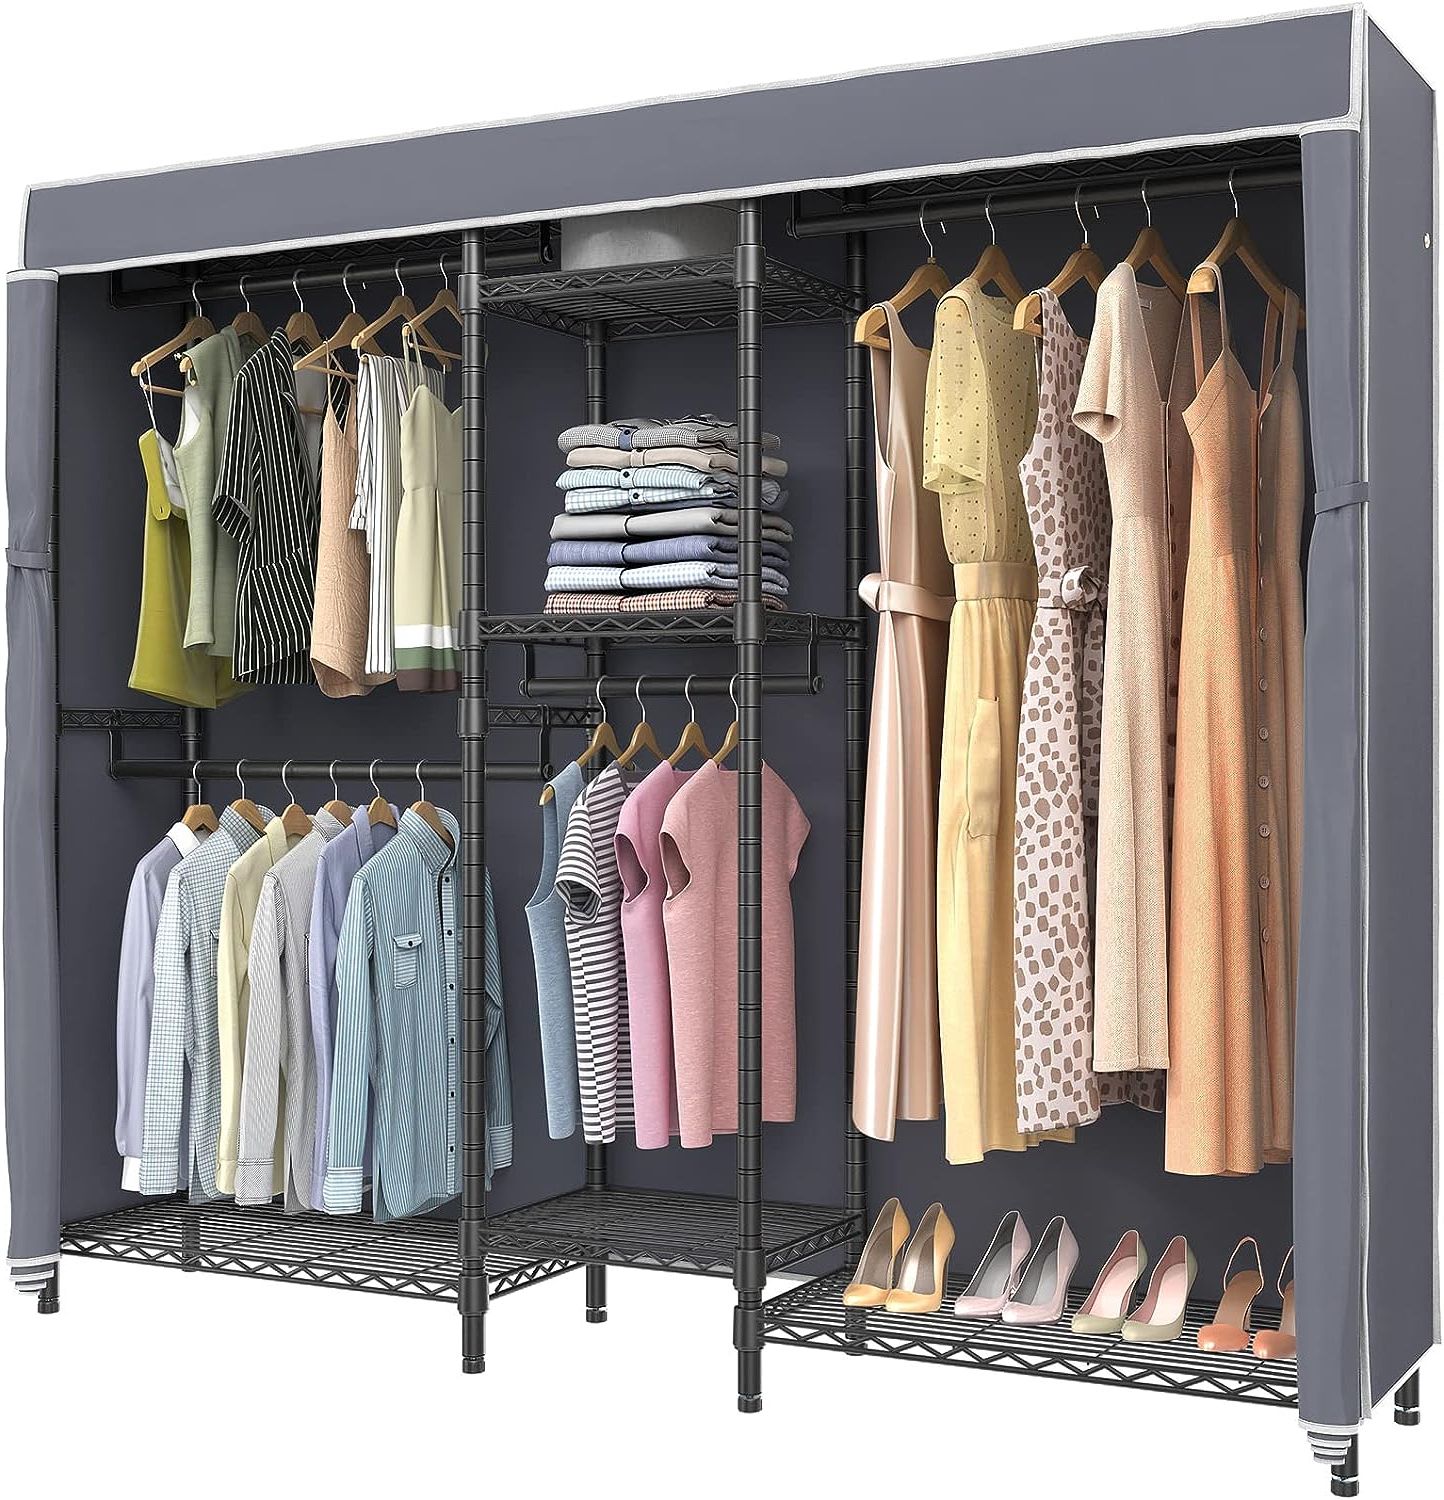 Vipek V6c Wire Garment Rack 5 Tiers Heavy Duty Italy | Ubuy Pertaining To Wardrobes With Cover Clothes Rack (View 2 of 20)